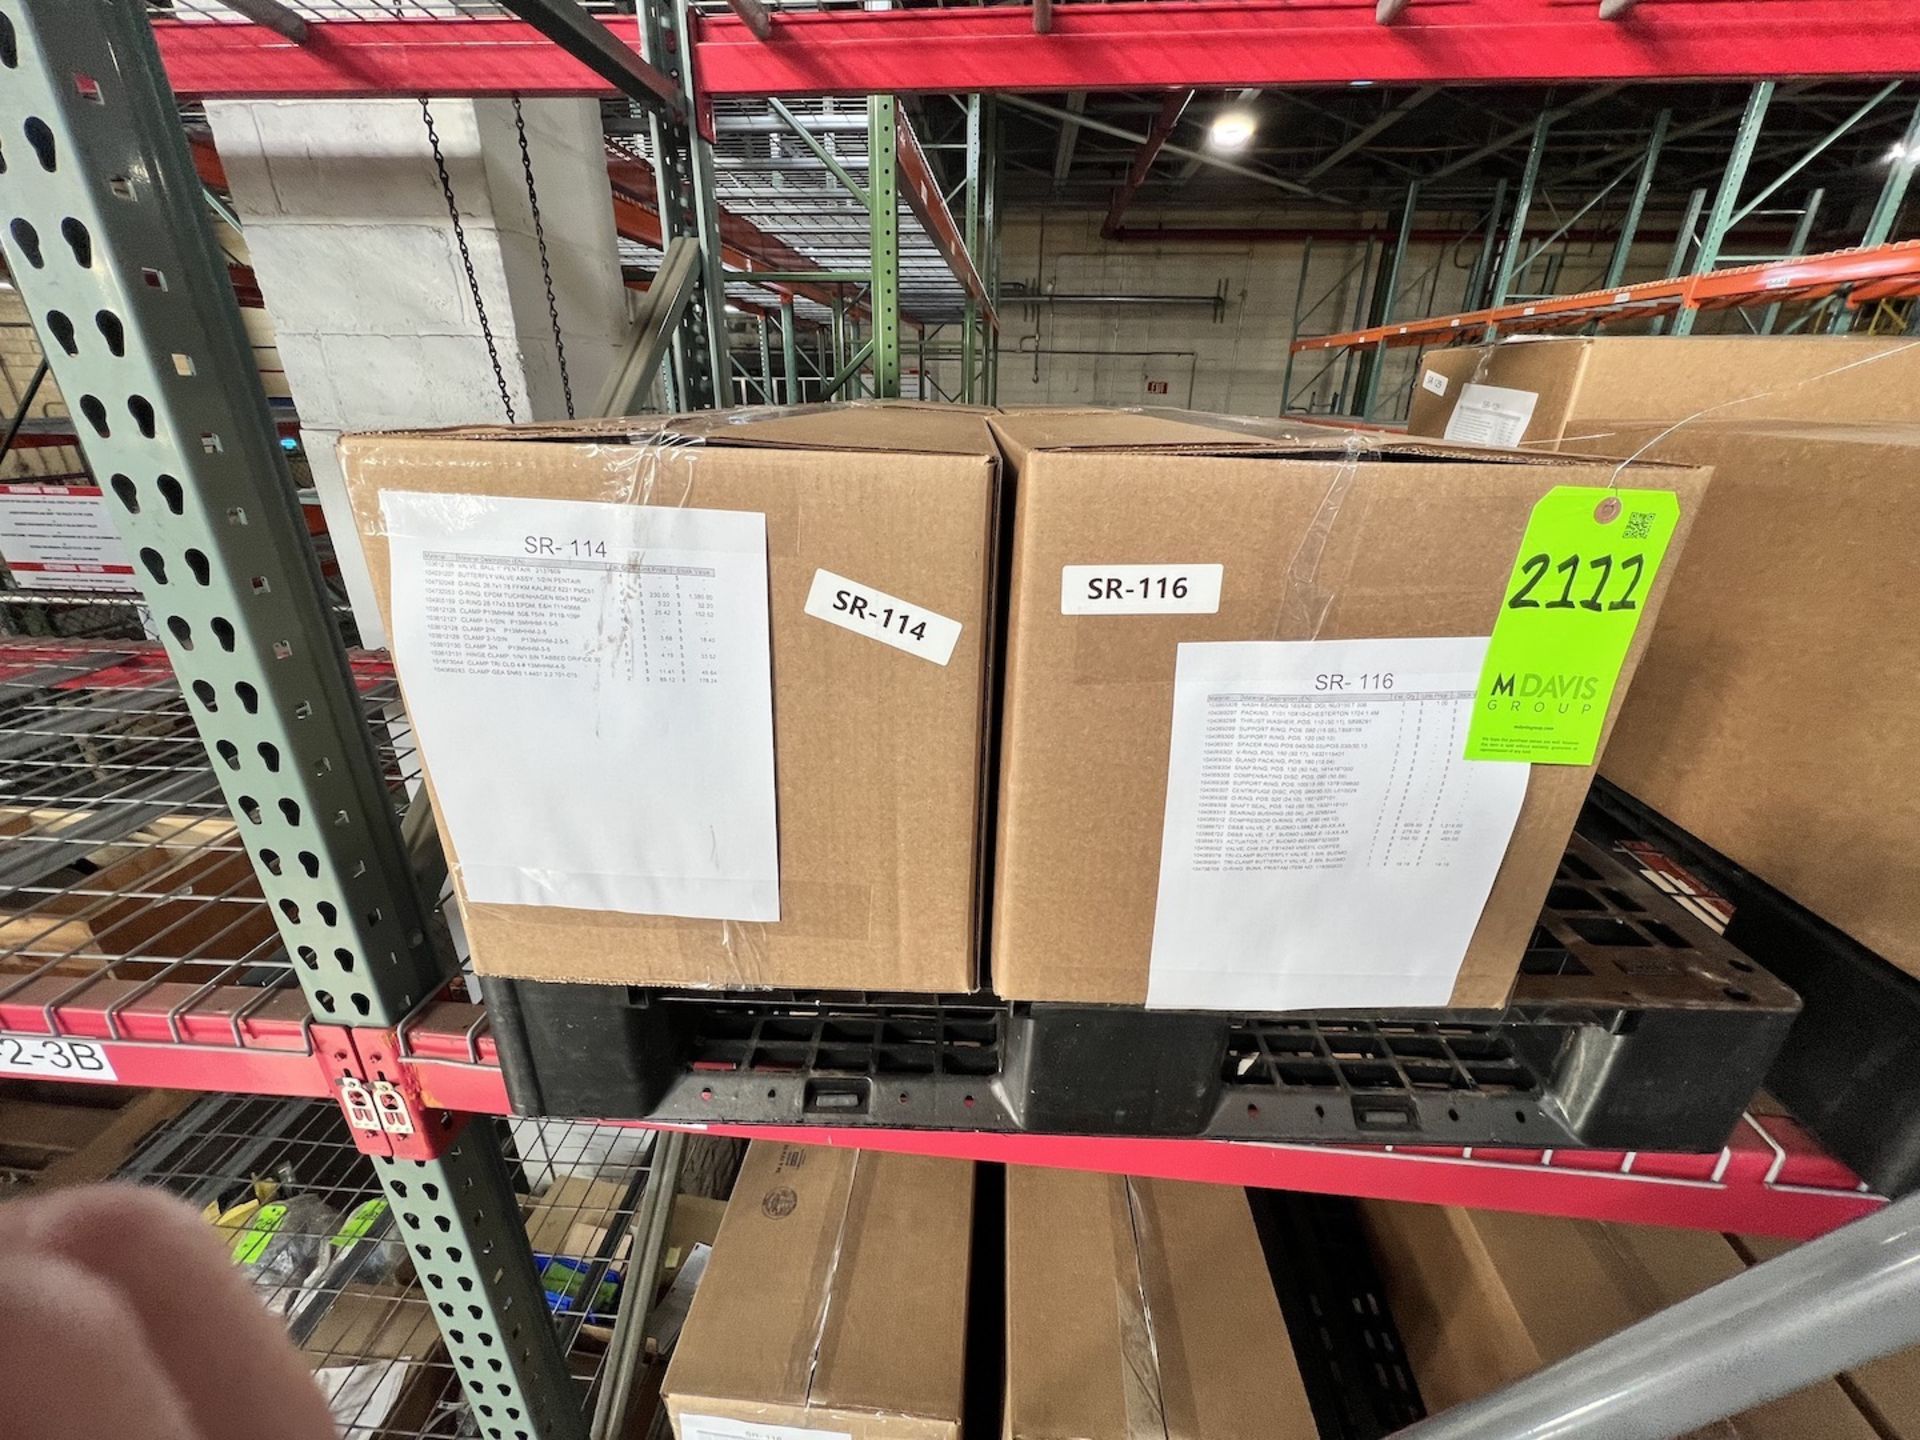 ASSORTED MRO AND SPARE PARTS, PLEASE SEE INVENTORY LISTS IN PHOTOS - Image 8 of 15